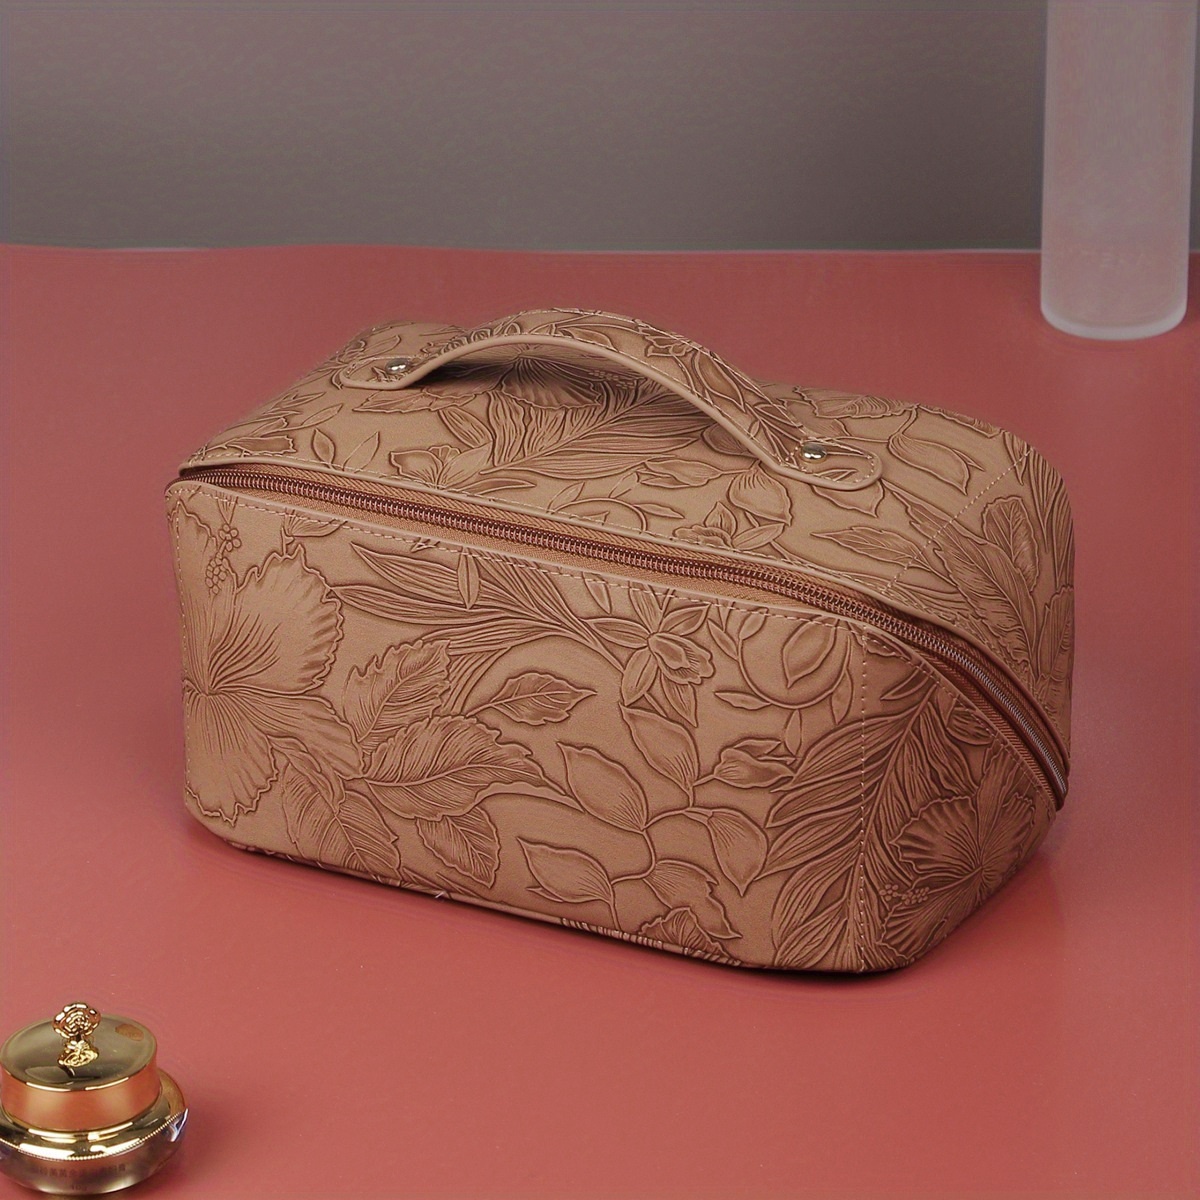 Vintage Floral Cosmetic Bag With Handle - Large Capacity Makeup